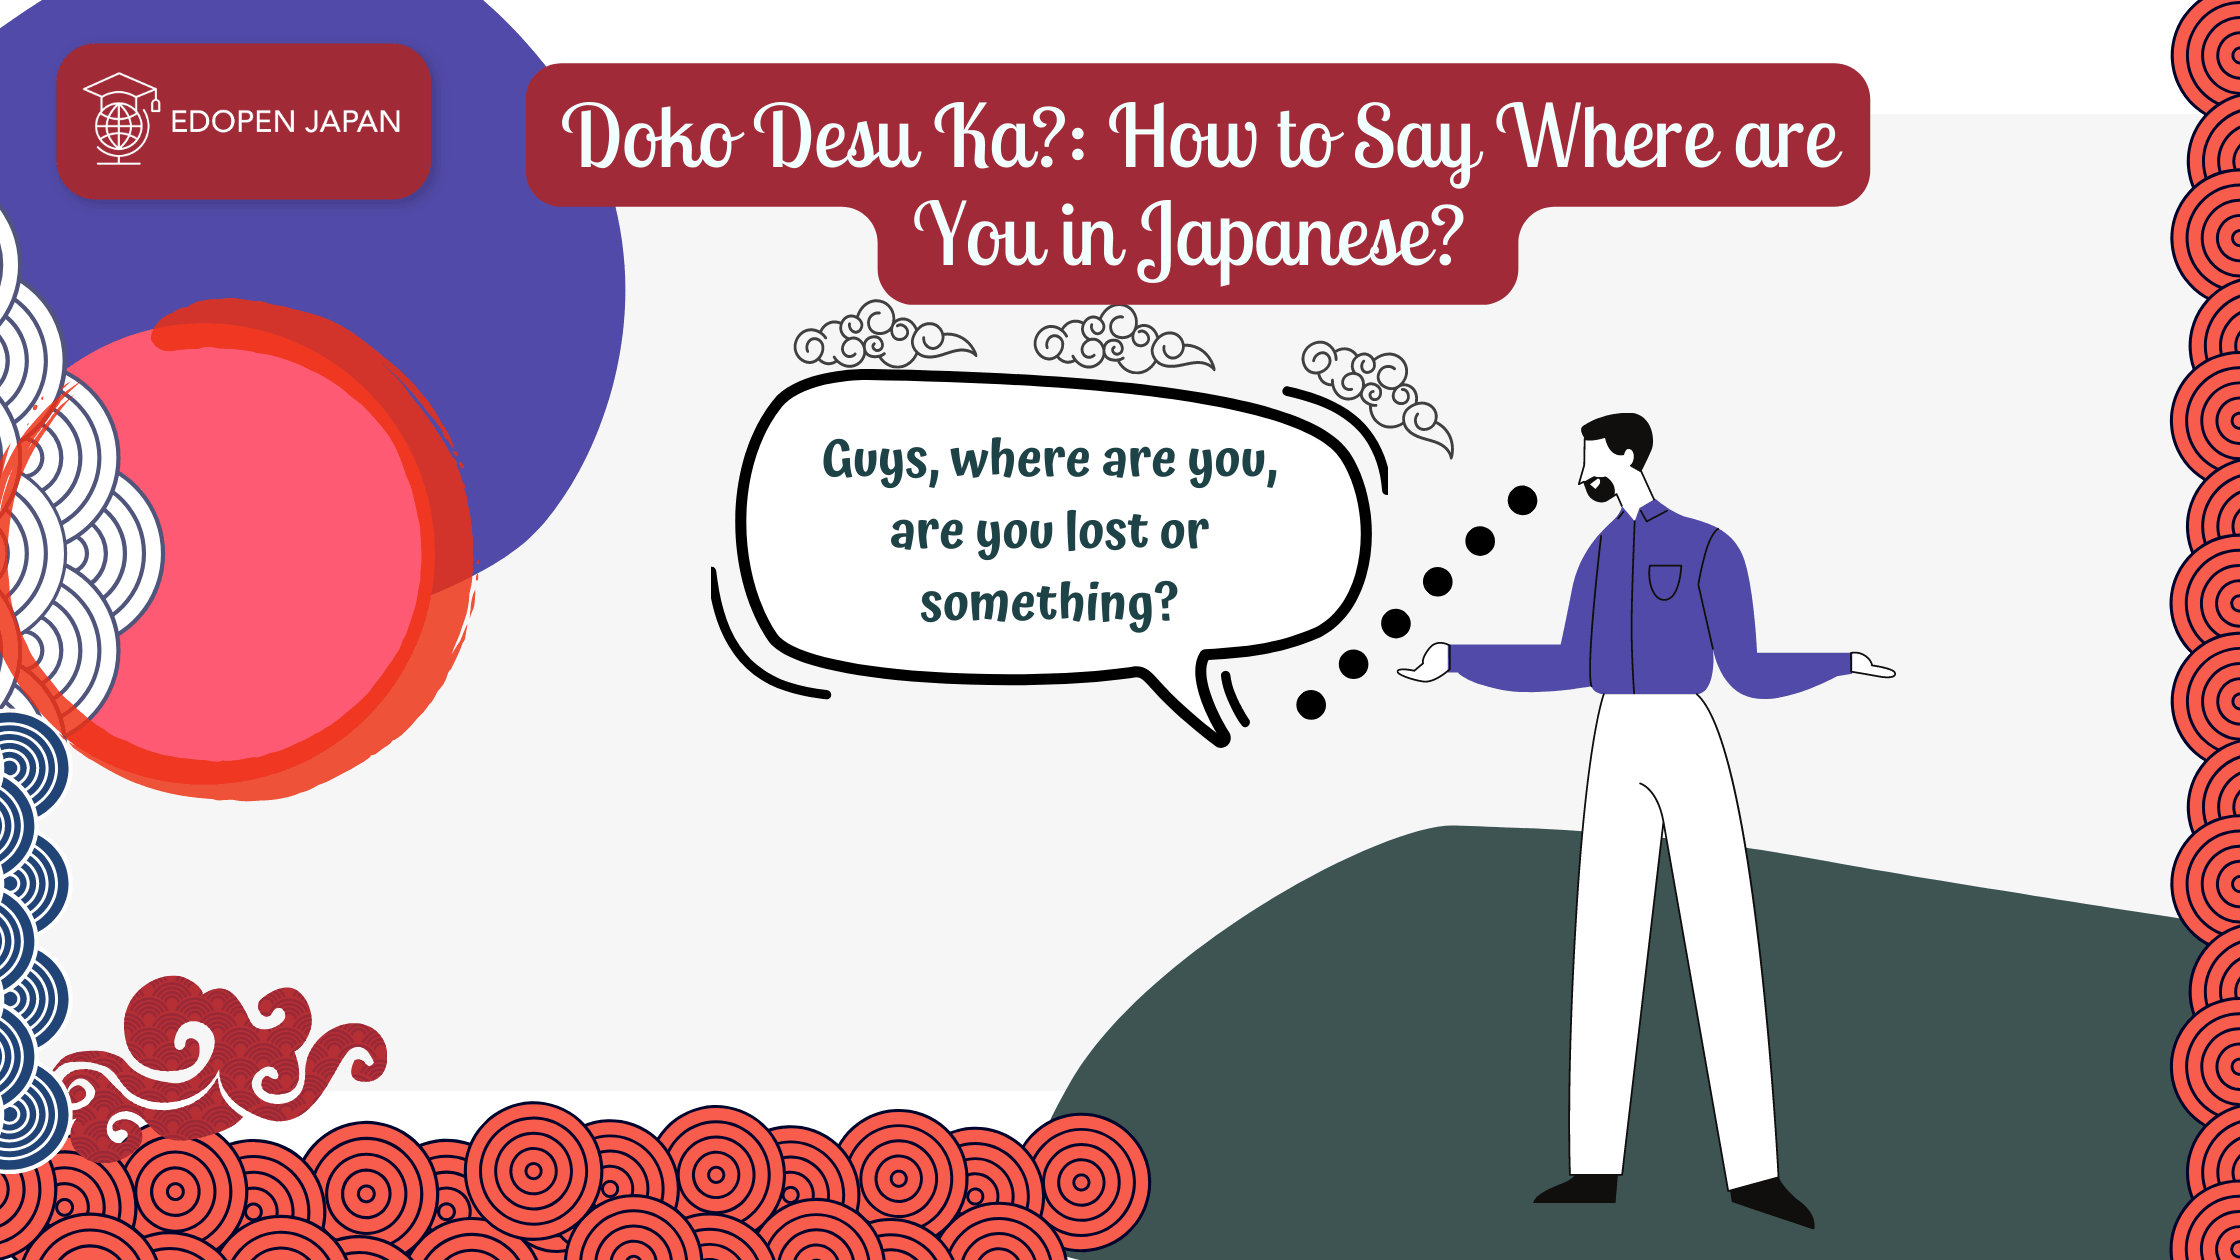 Doko Desu Ka?: How to Say Where are You in Japanese? - EDOPEN Japan